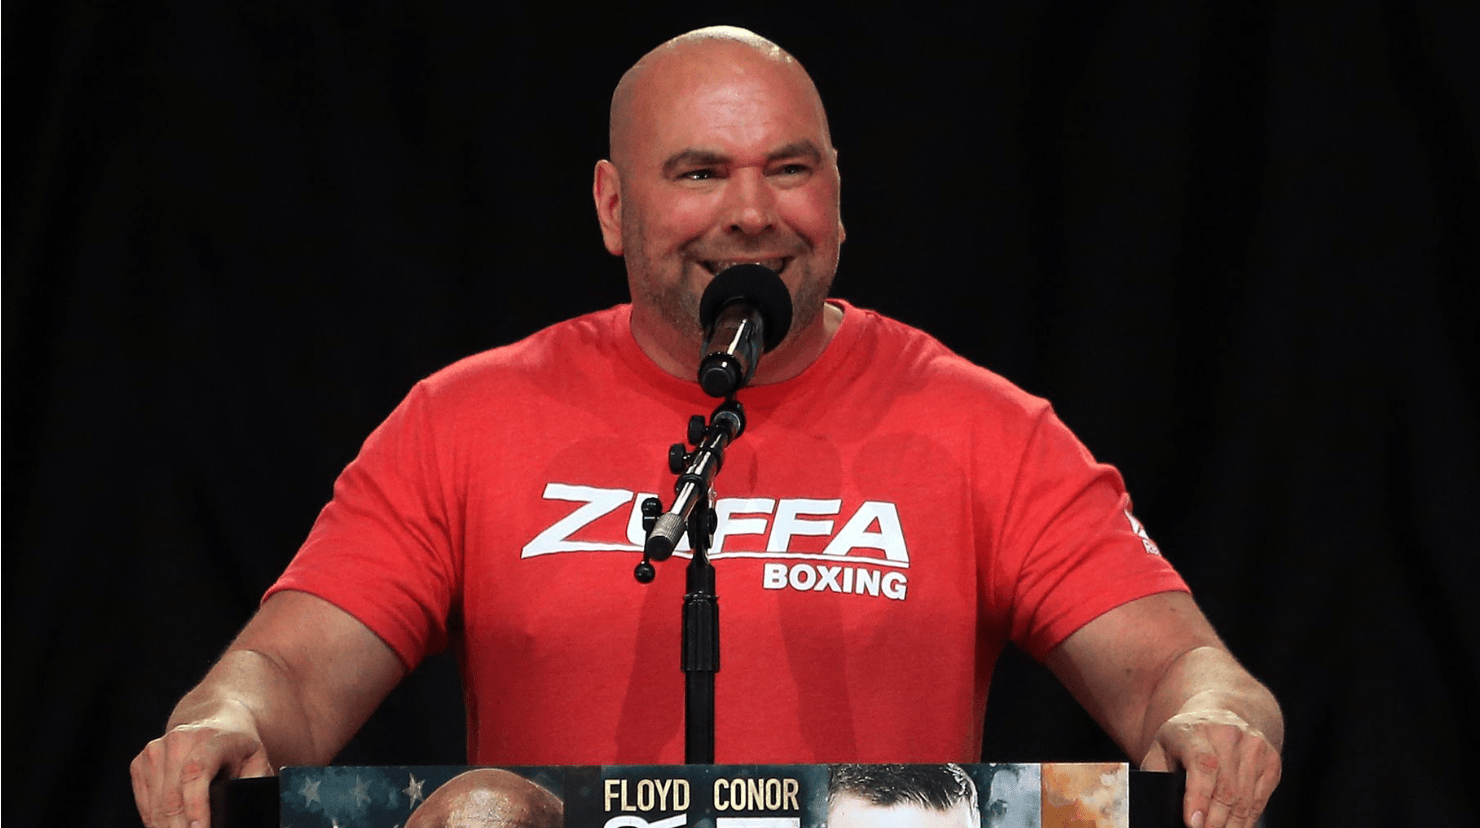 Dana White Says The Boxing Model Is Broken And He’s The Man To Fix It